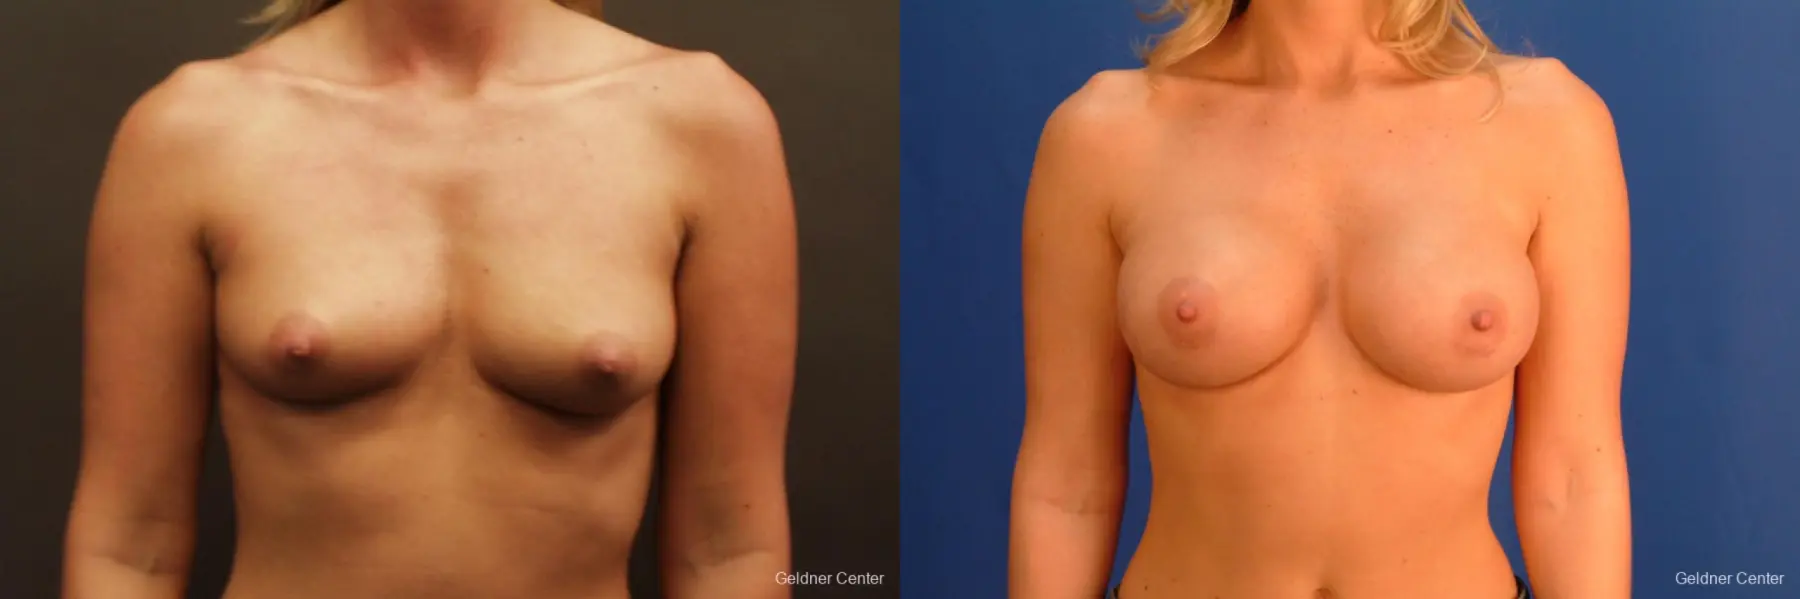 Breast Augmentation Streeterville, Chicago 2425 - Before and After 1